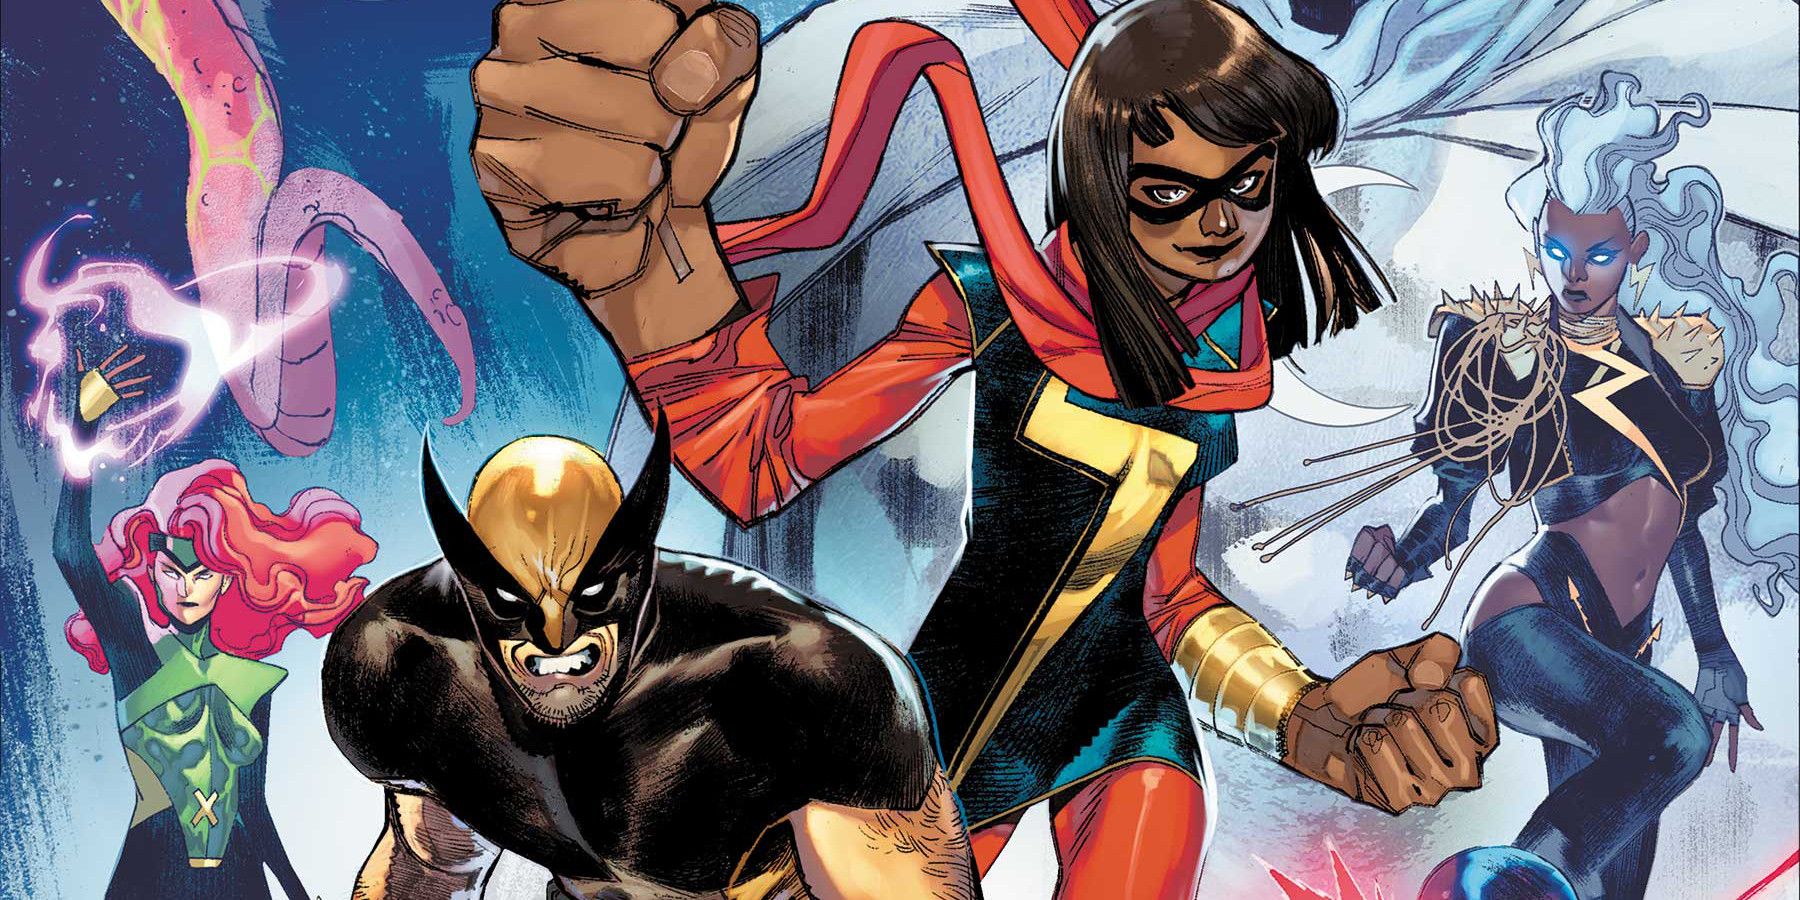 ms. marvel and wolverine in the cover of their new comic